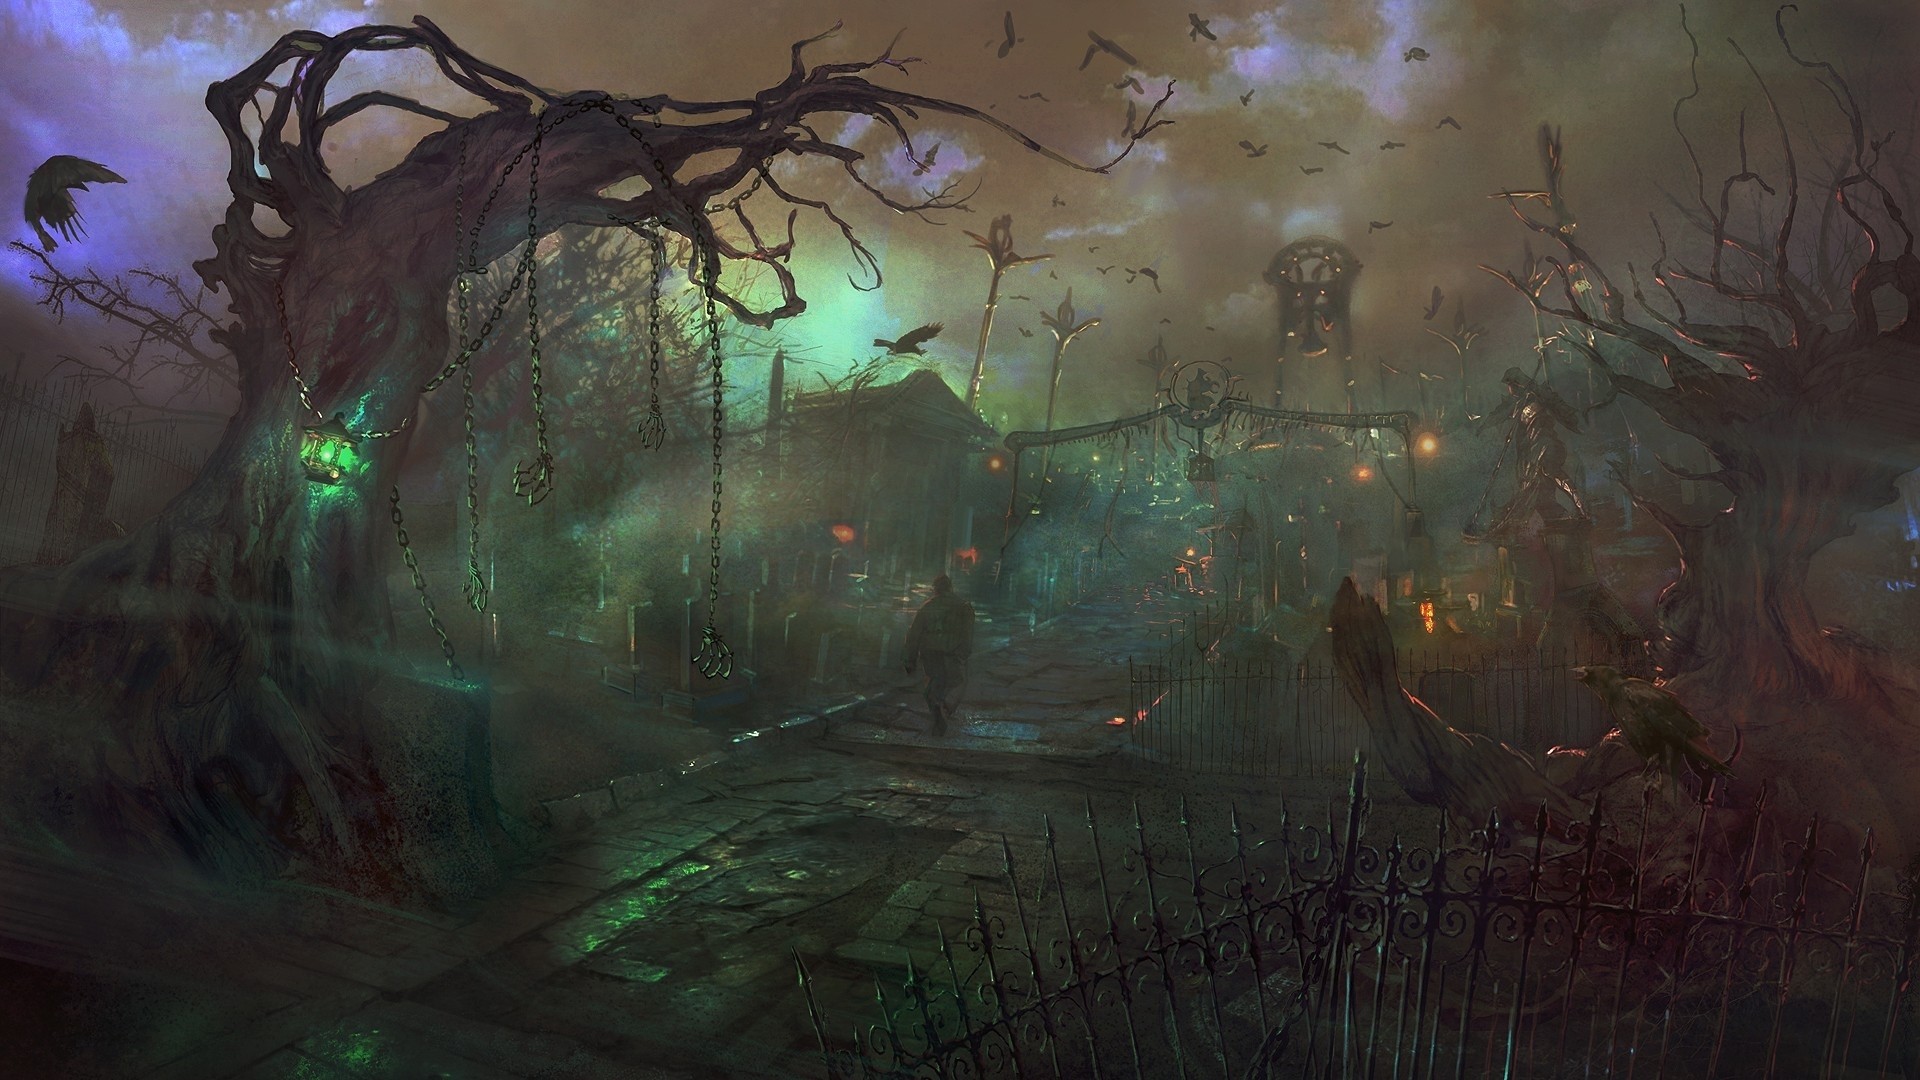 1920x1080 Woodland Cemetery by Lars Grant-West | Setting - Fantasy | Pinterest |  Cemetery, Mtg art and Environment design